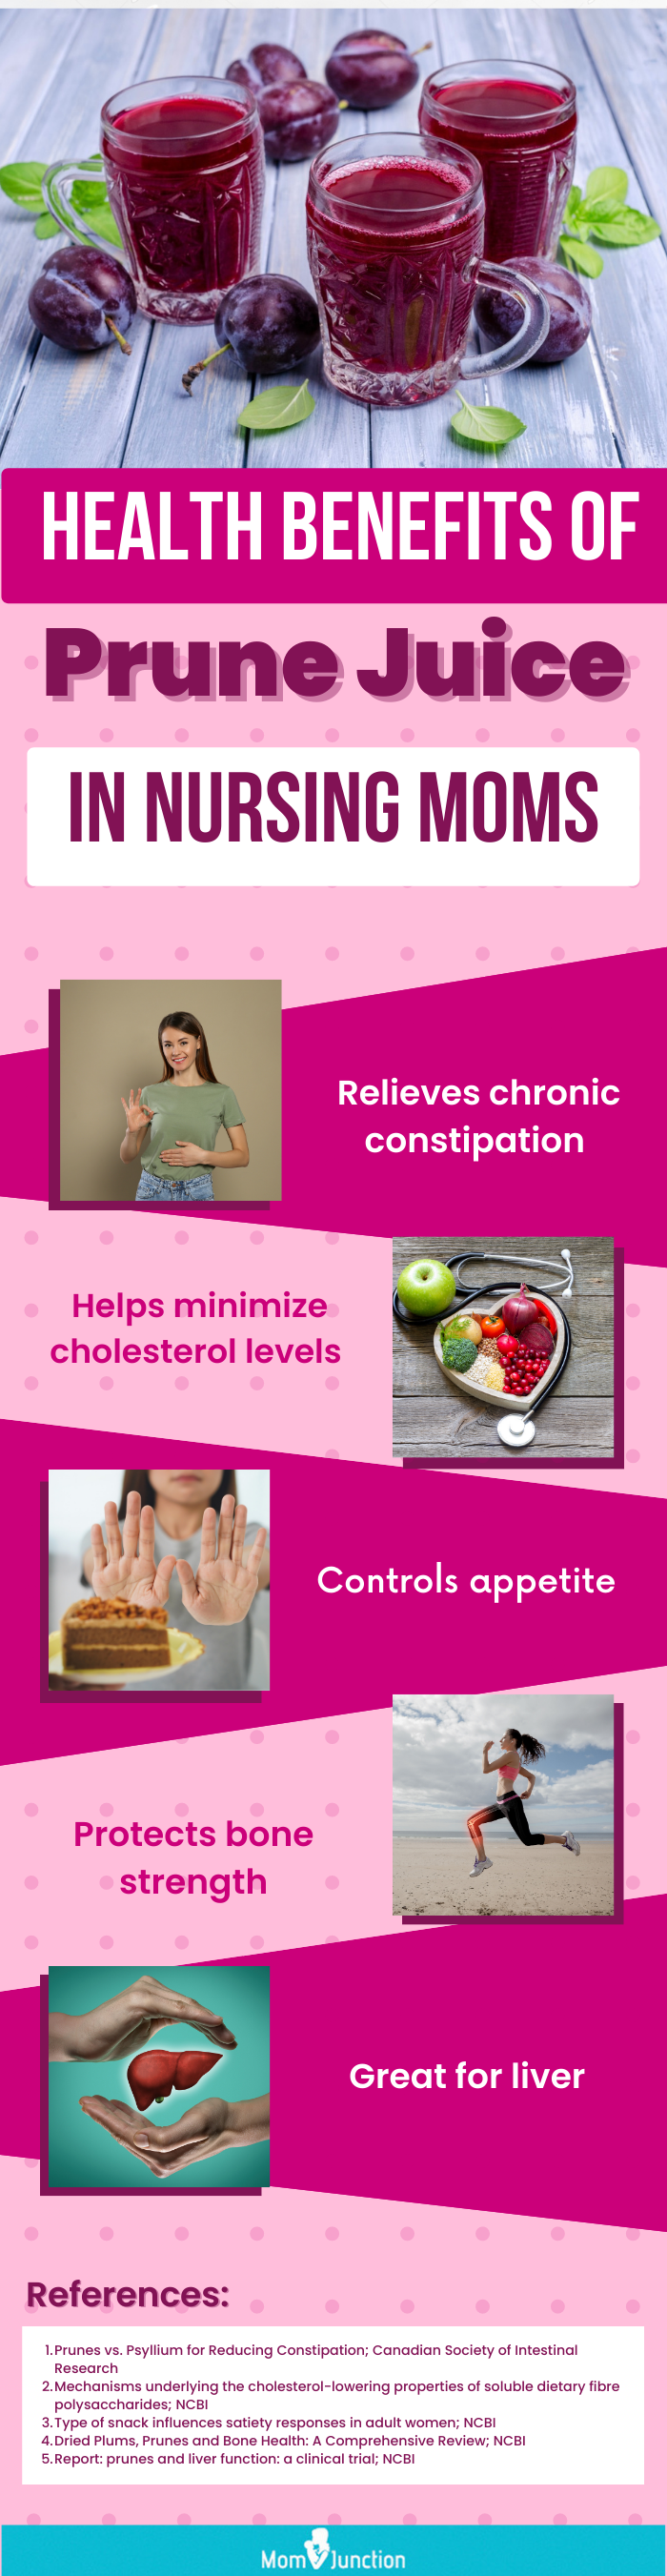 advantages of drinking prune juice while breastfeeding (infographic)